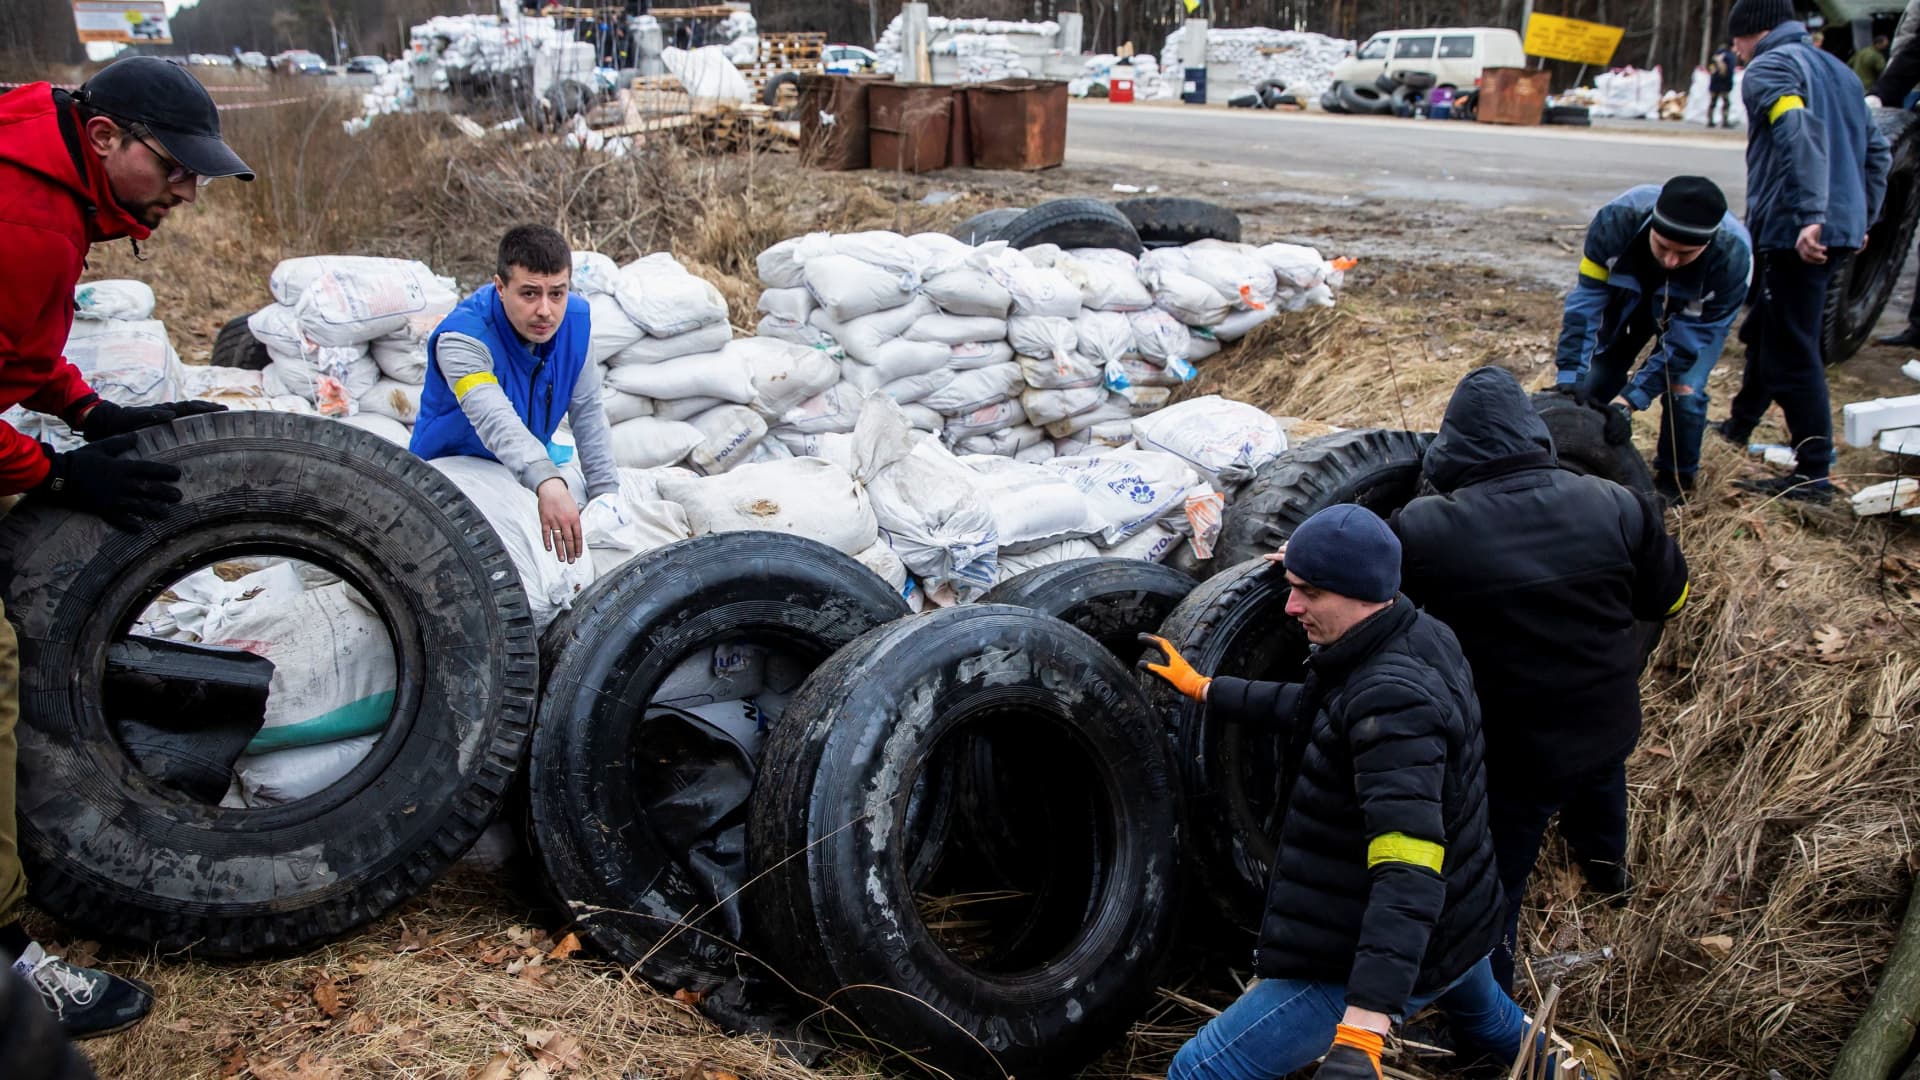 Members of the Ukrainian Territorial Defence Forces reinforce the checkpoint with tires, after Russia launched a massive military operation against Ukraine, in the city of Zhytomyr, Ukraine February 27, 2022.